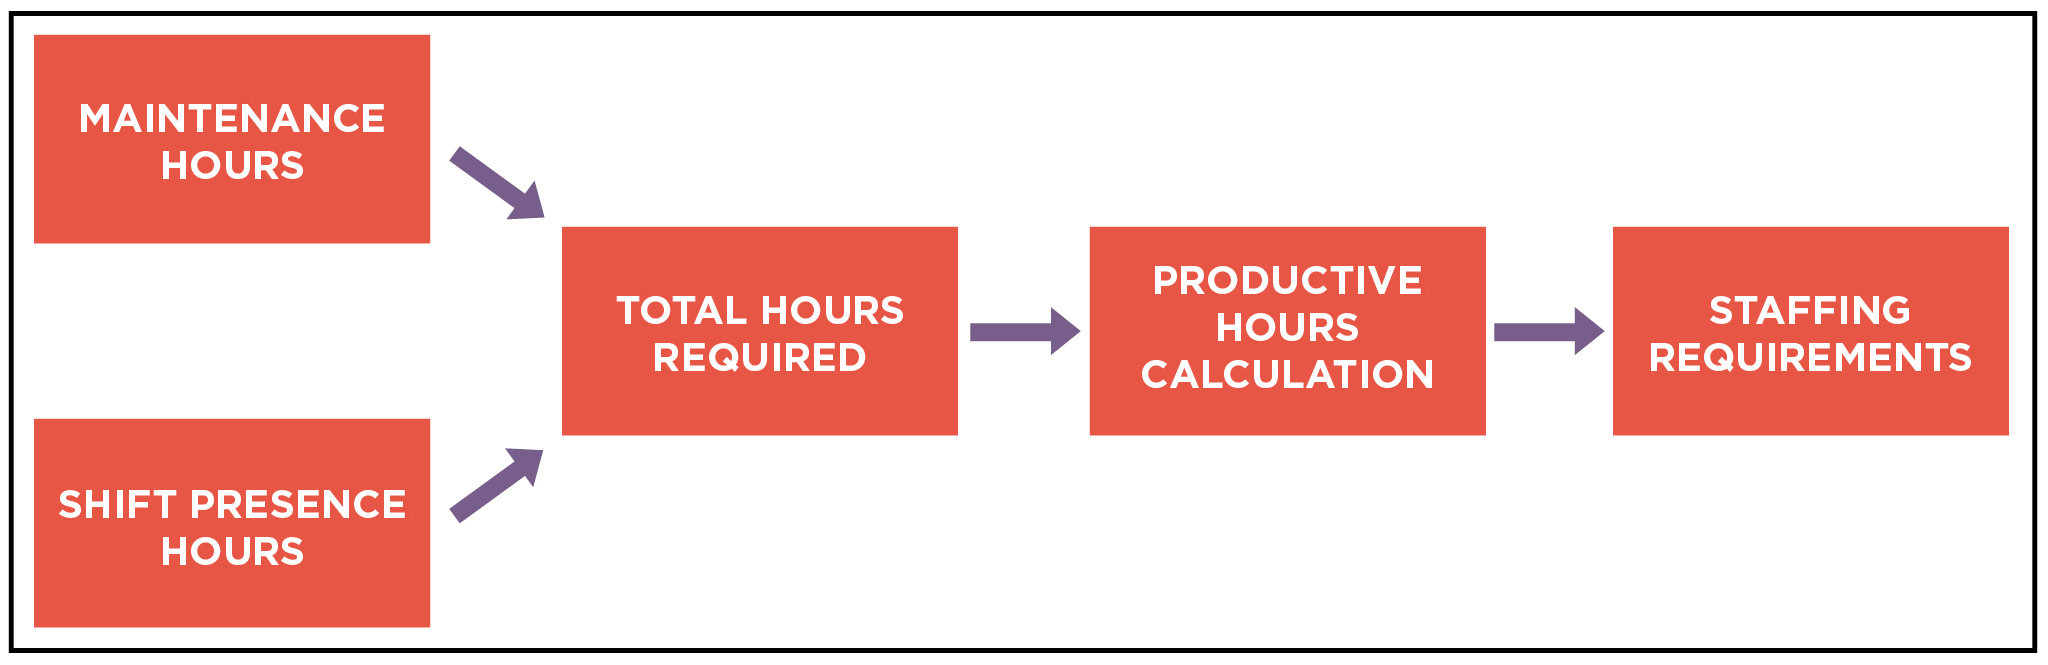 Figure 2. Factors that go into calculating staffing requirements